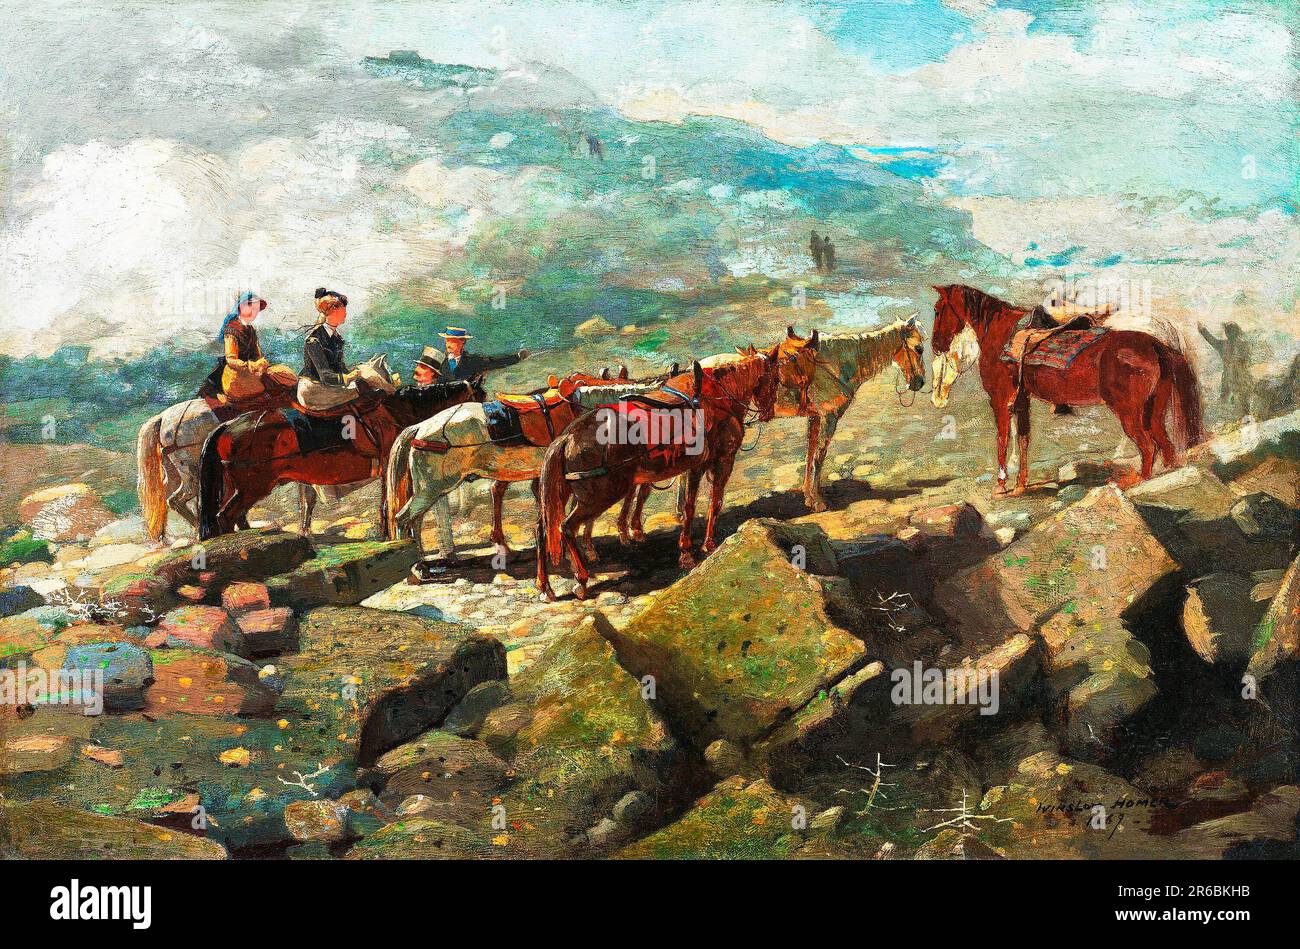 Mount Washington by Winslow Homer. Original from The Smithsonian Institution. Stock Photo